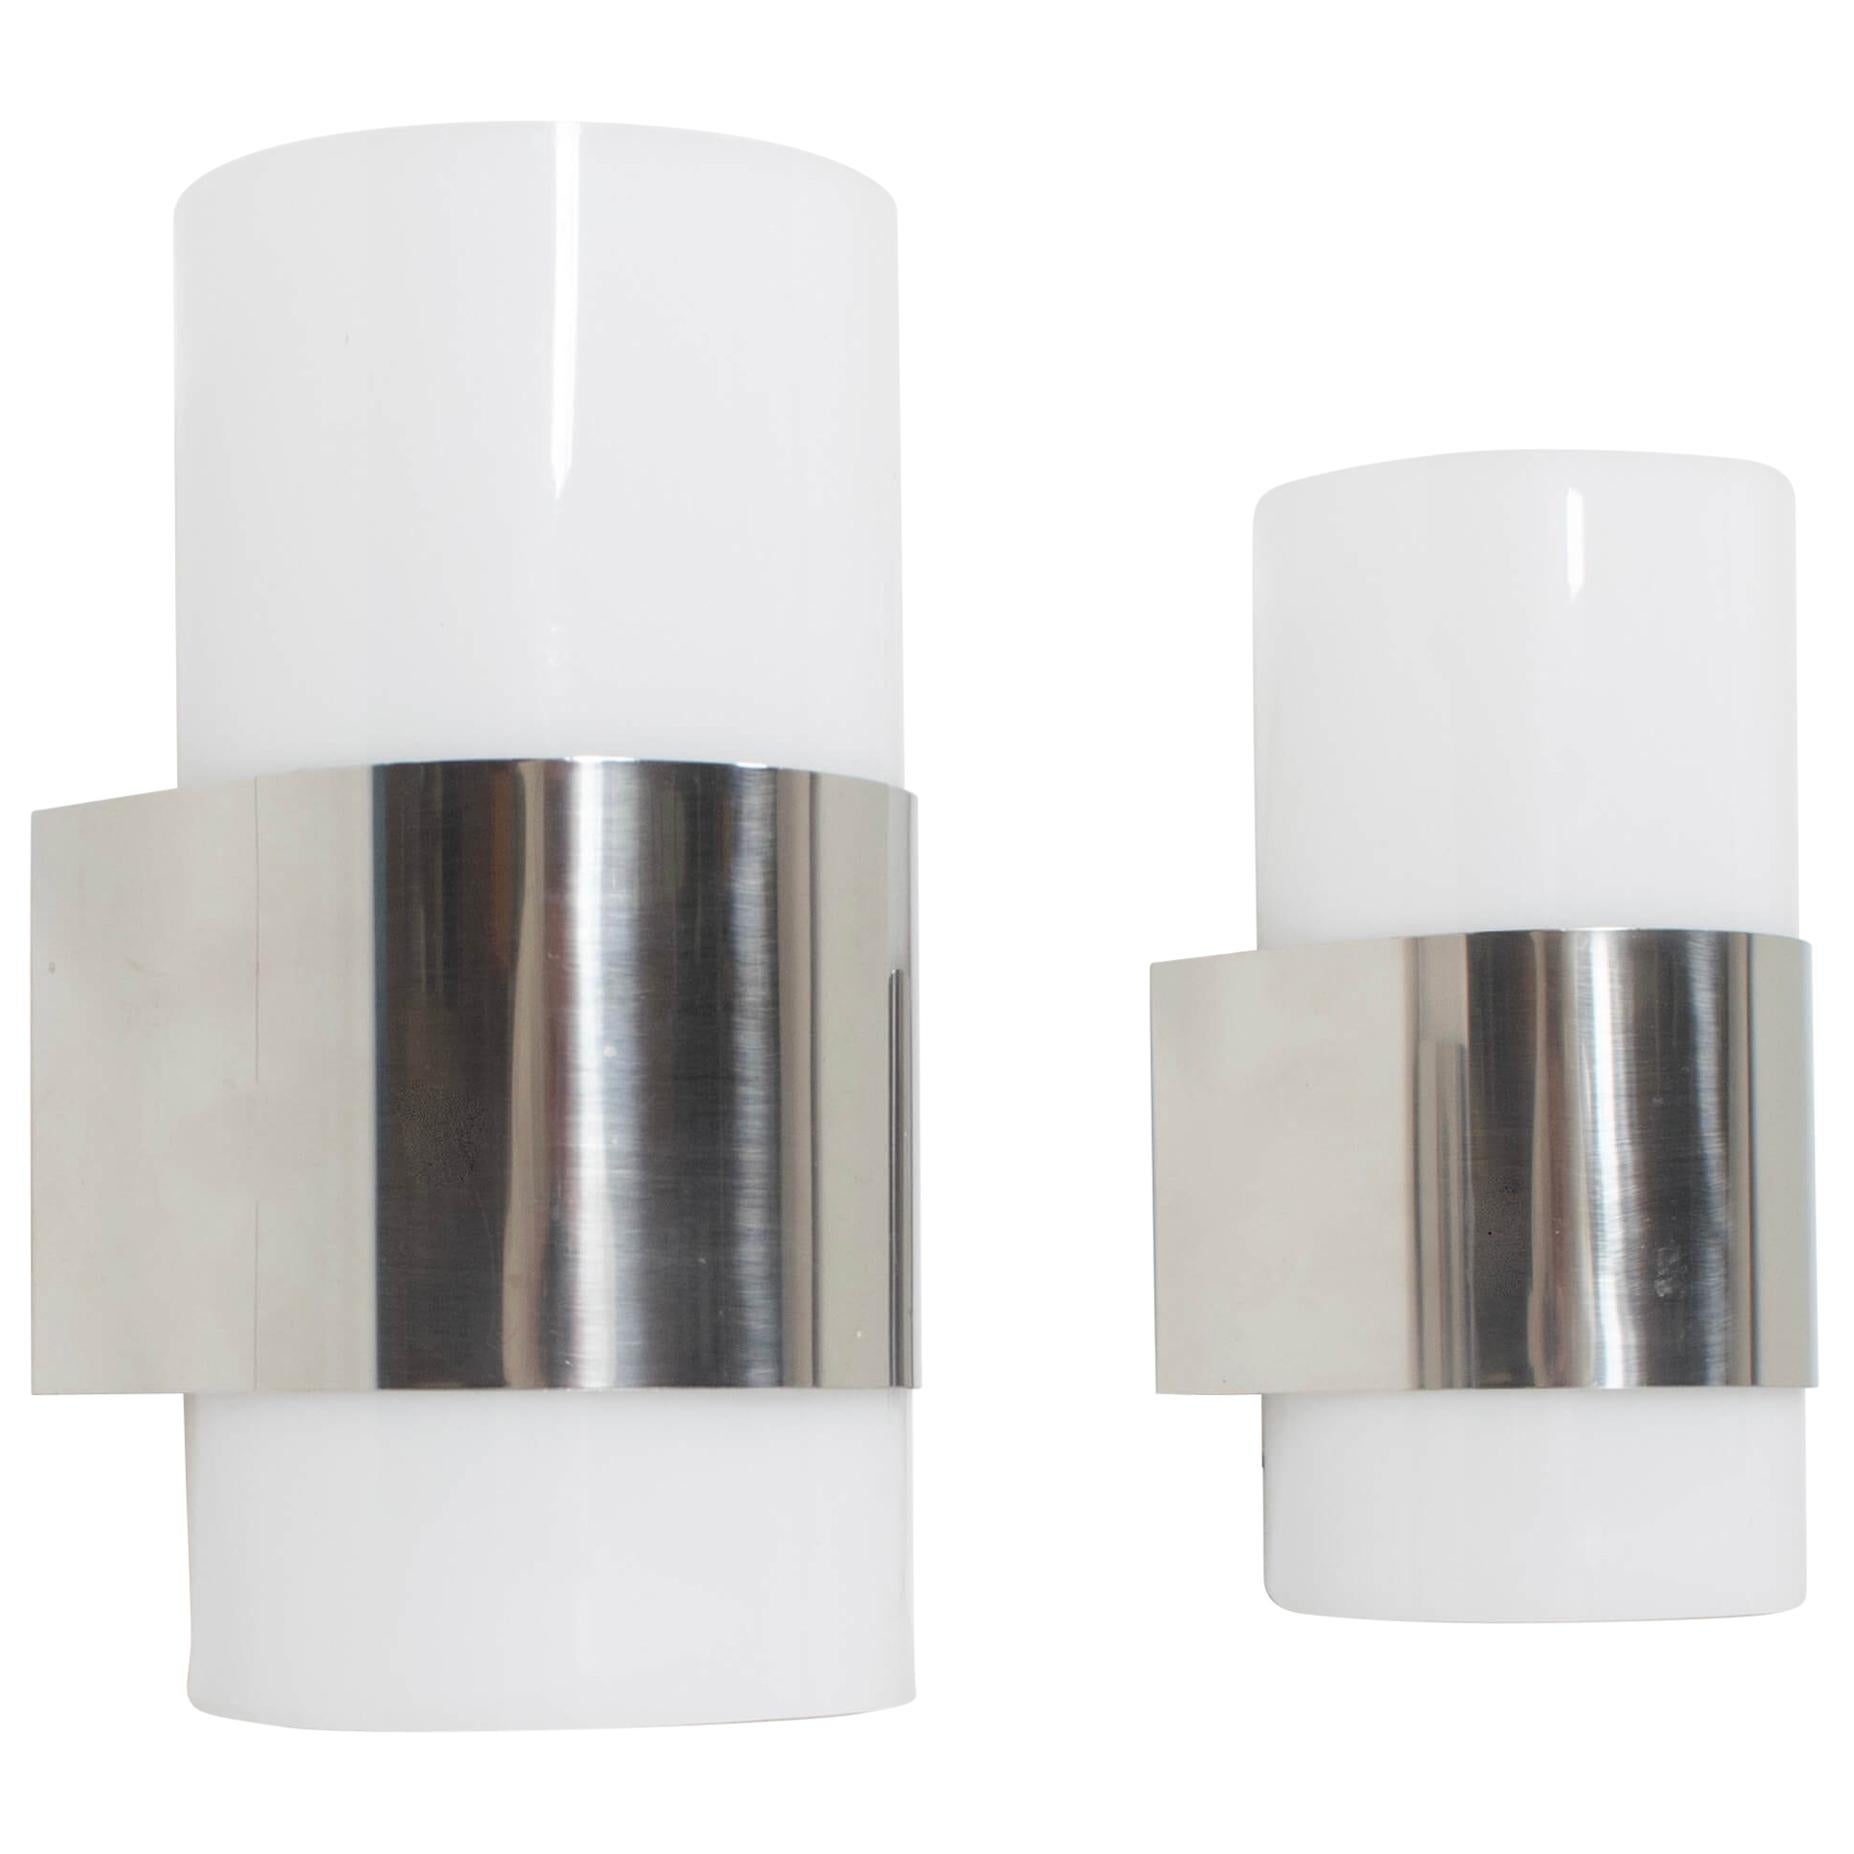 Set of Two Metracrilato Wall Lights from Metalarte, 1980s, Spain For Sale